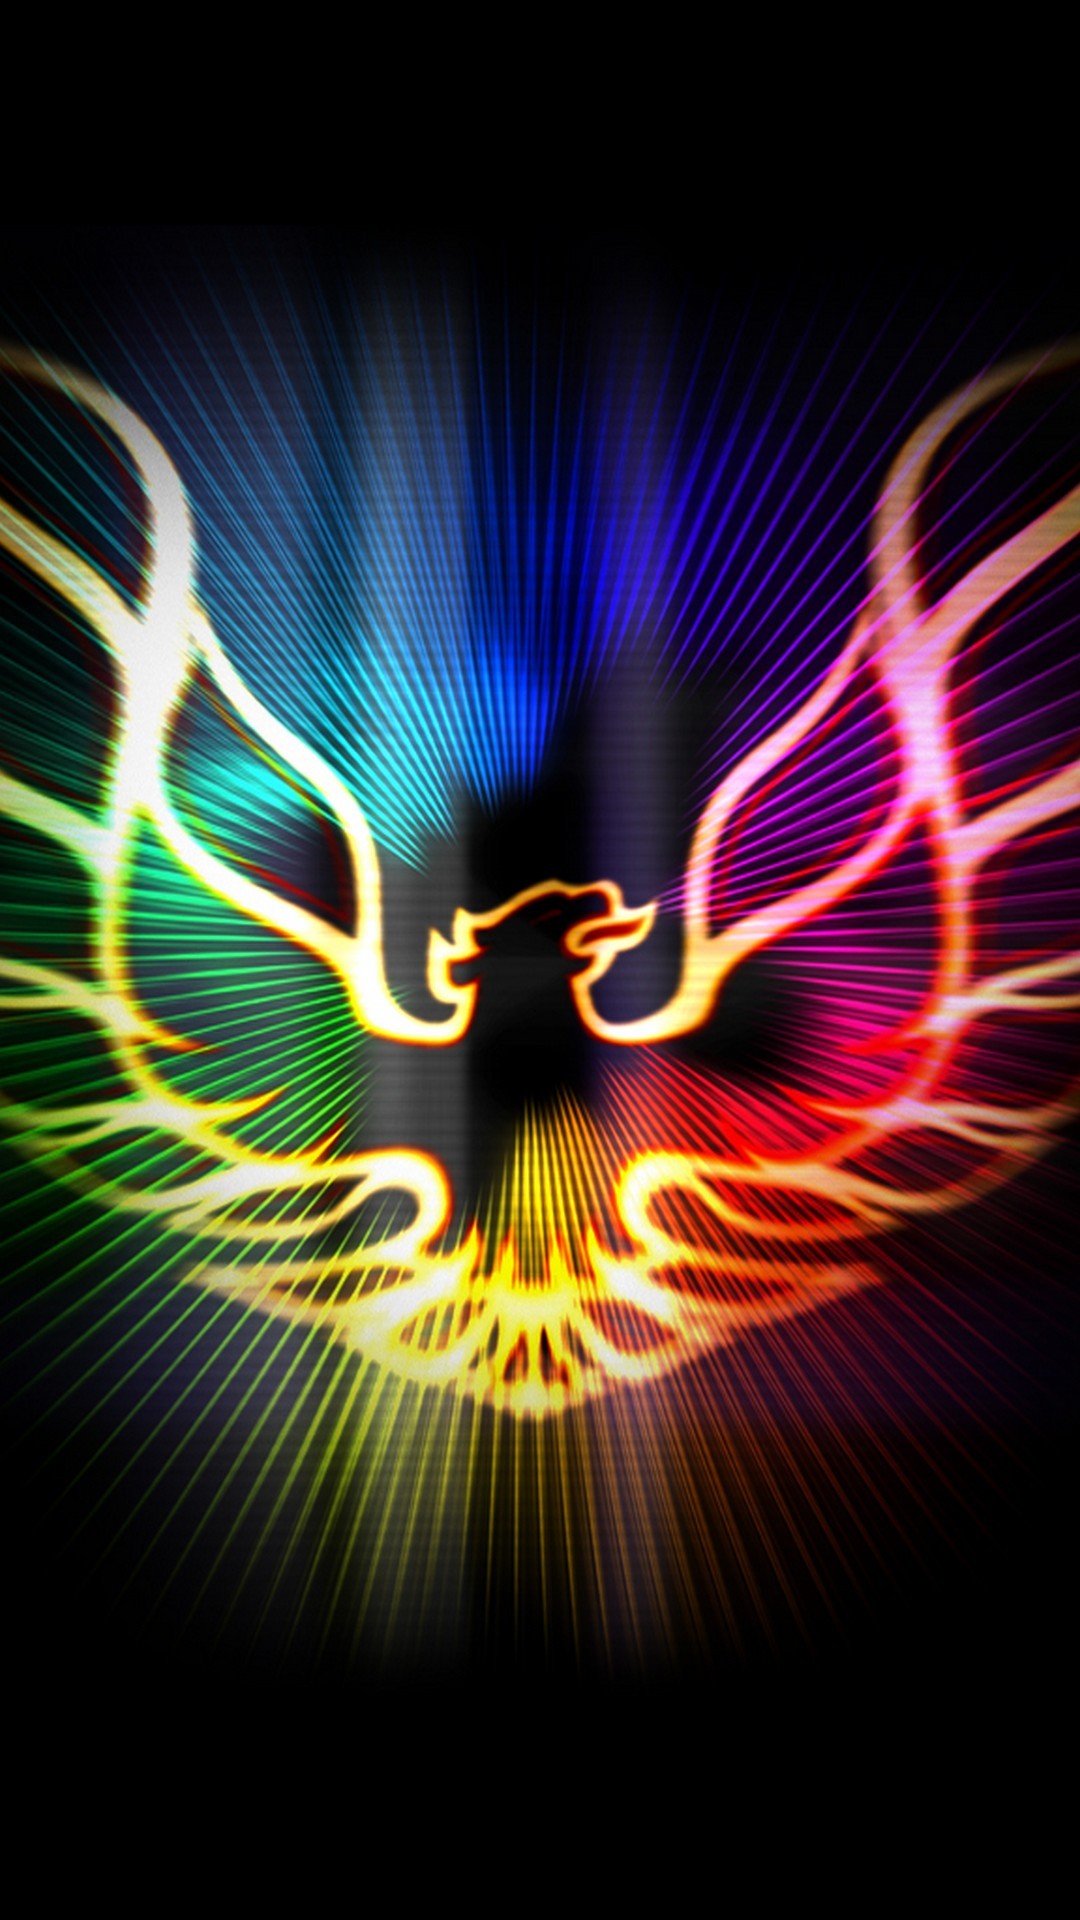 Wallpaper Phoenix Images Android with image resolution 1080x1920 pixel. You can make this wallpaper for your Android backgrounds, Tablet, Smartphones Screensavers and Mobile Phone Lock Screen